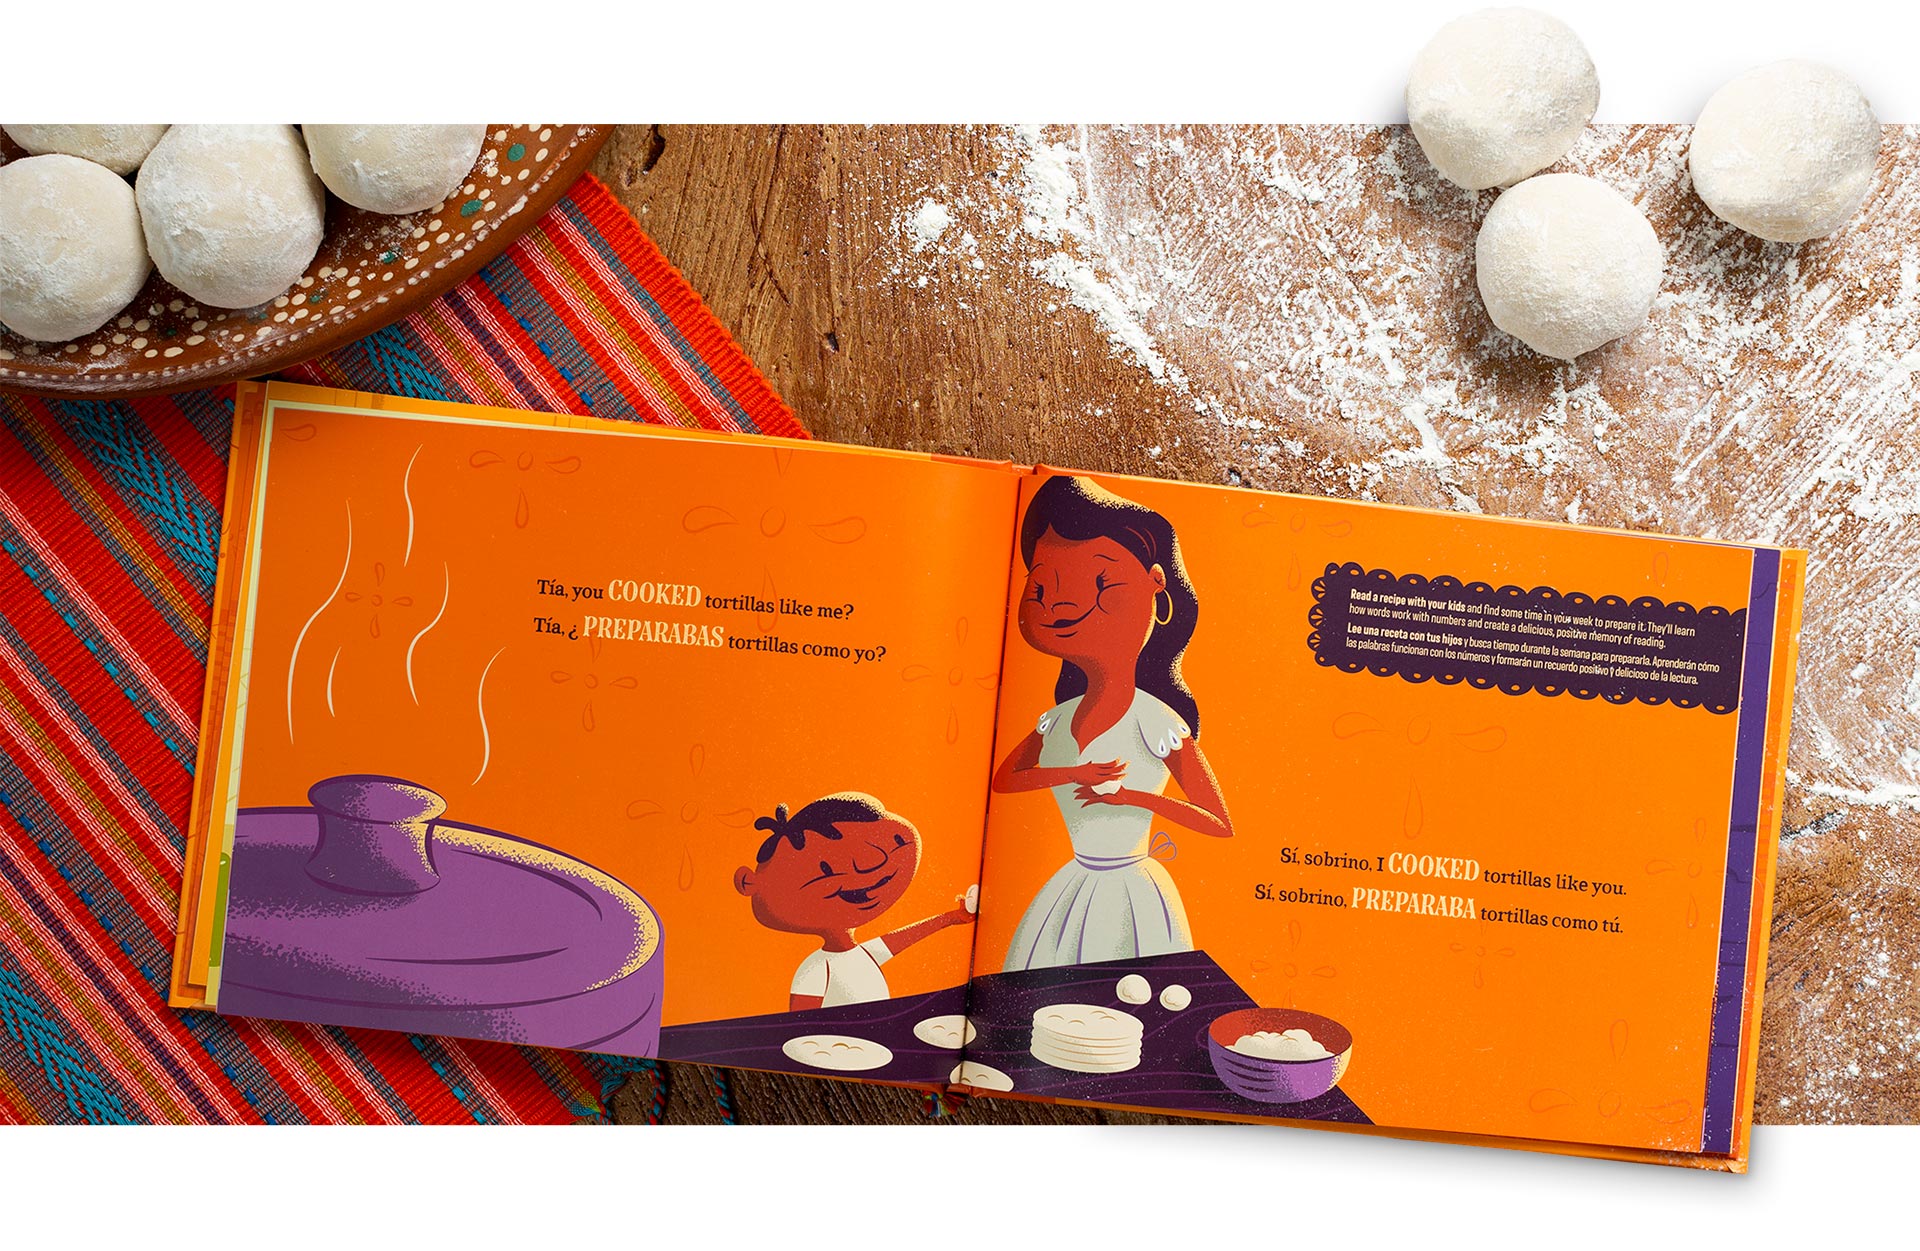 Just Like You book open showing a spread of a mother and son making tortillas. The book is open on a table with tortilla ingredients laid out.